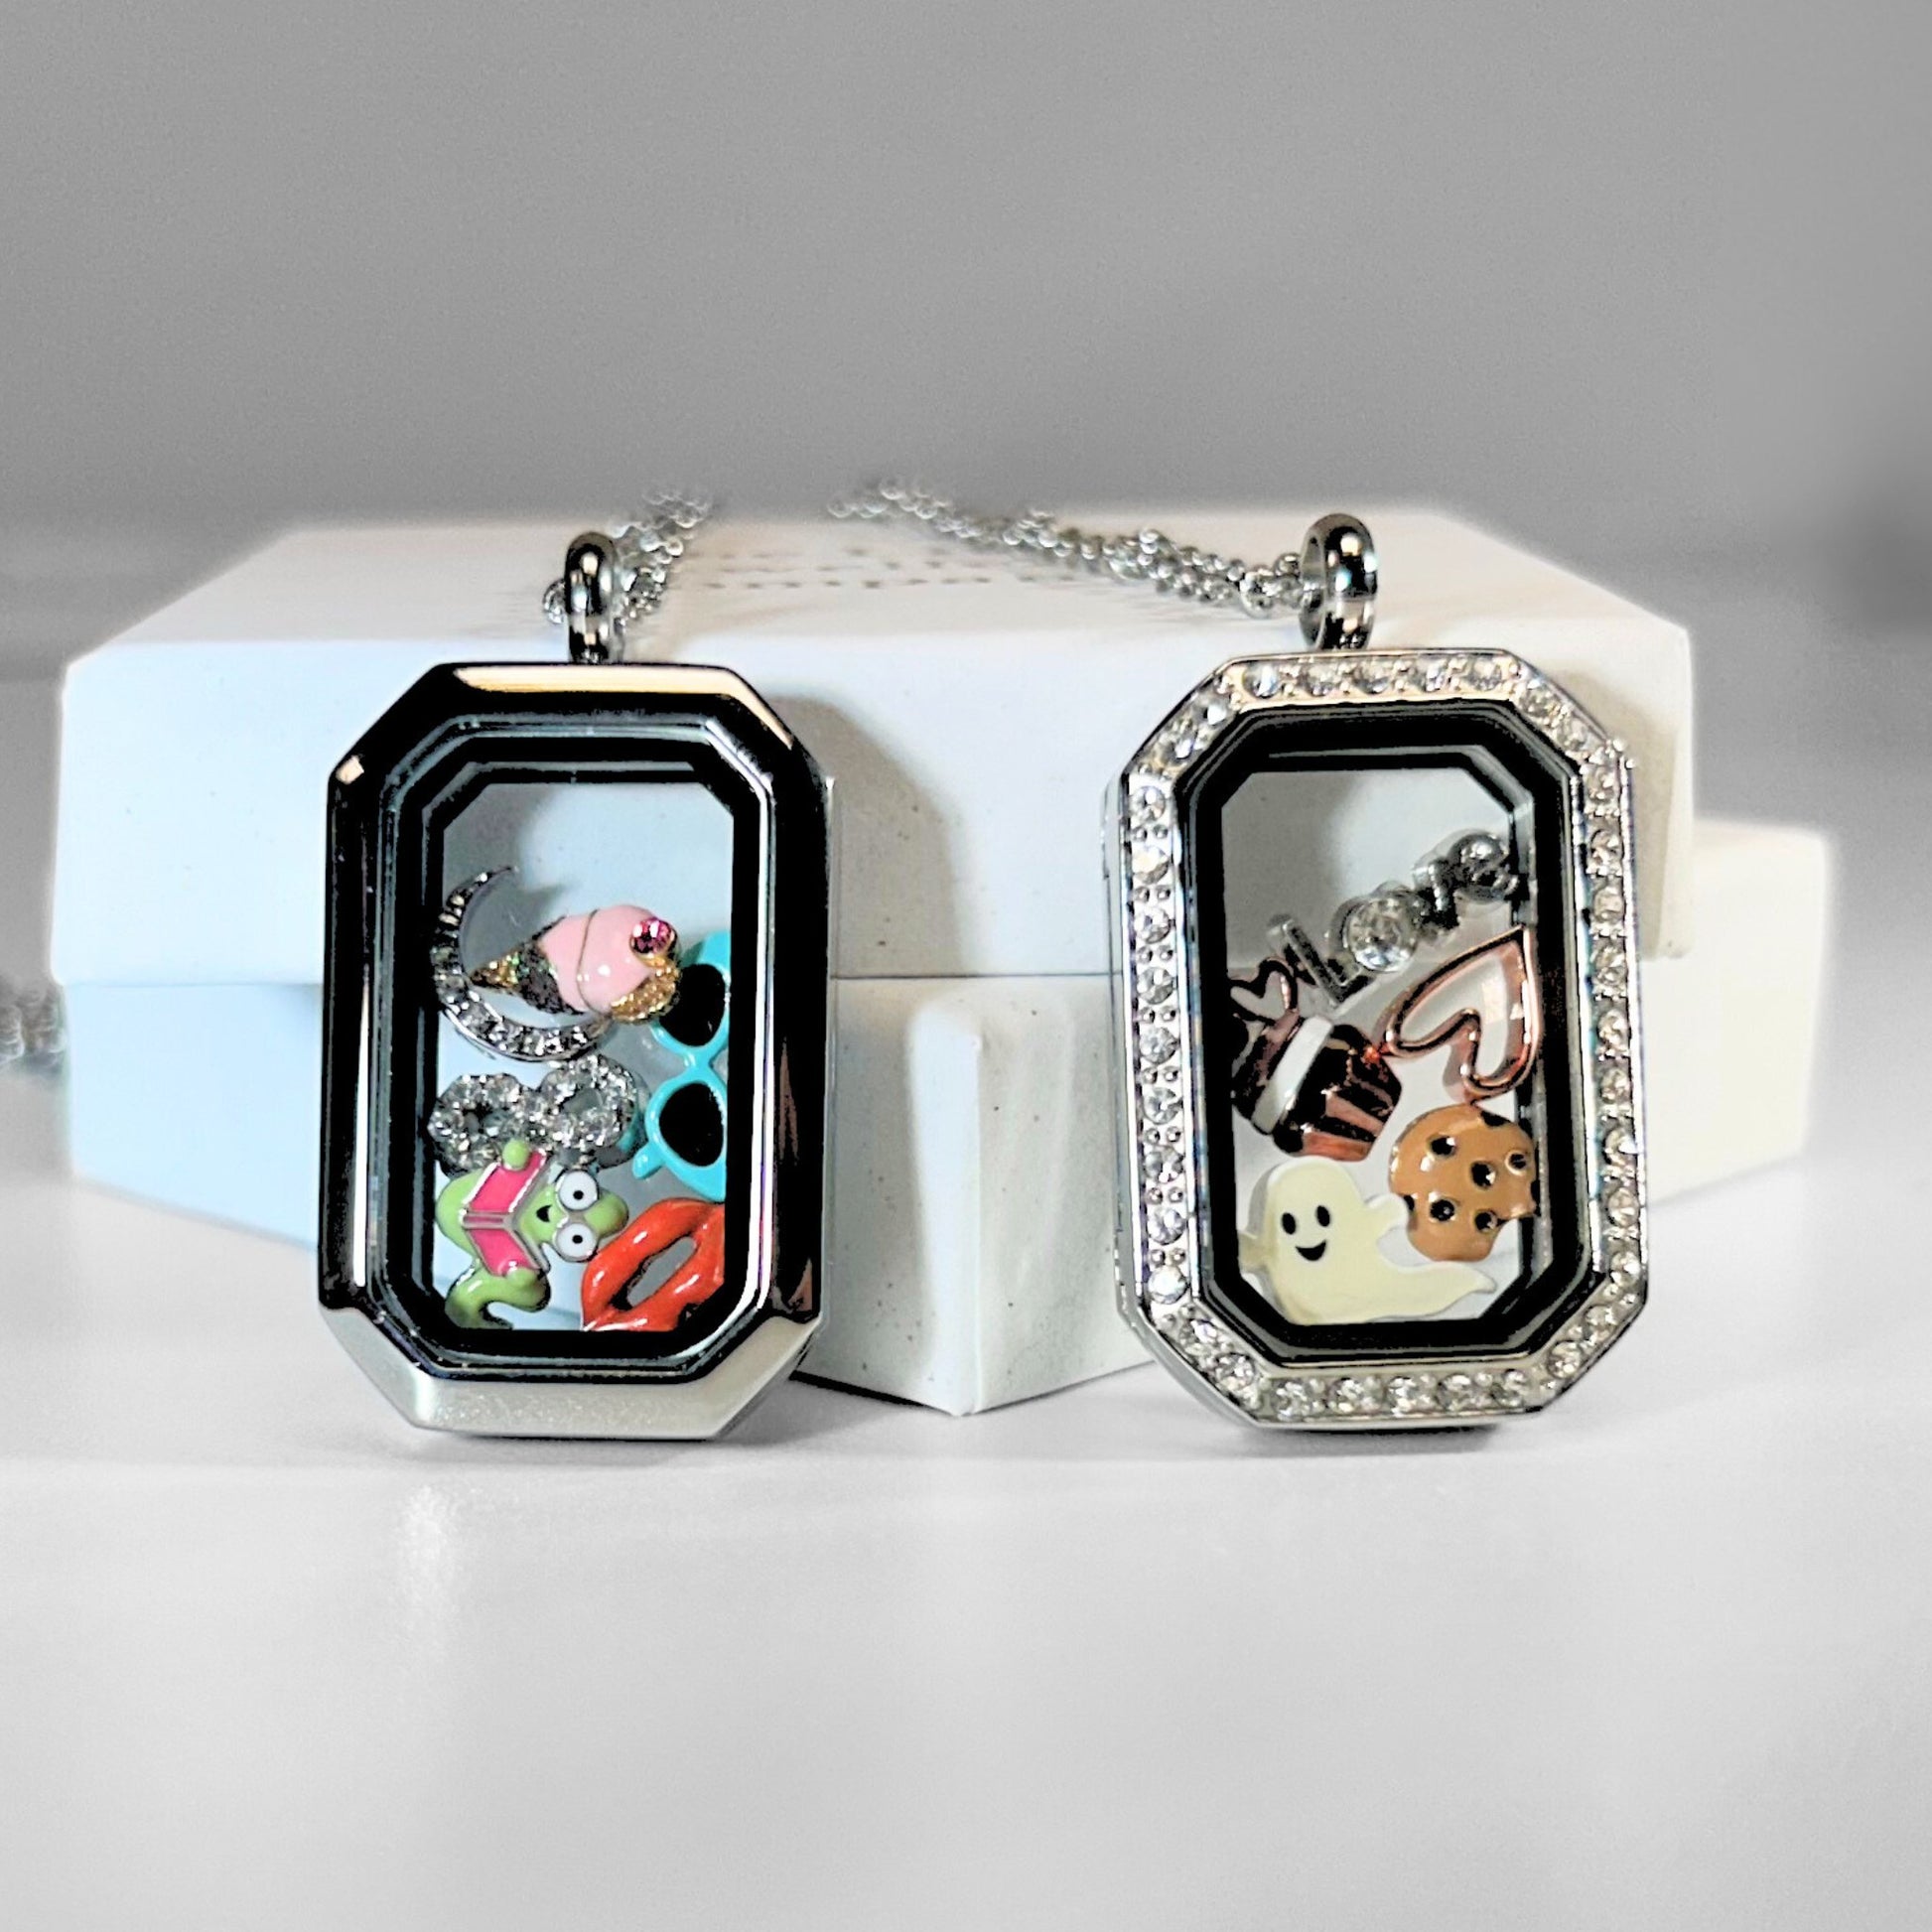 NEW! Limited Edition Memory Locket - Portrait Frame with Crystals - The Little Jewellery Company